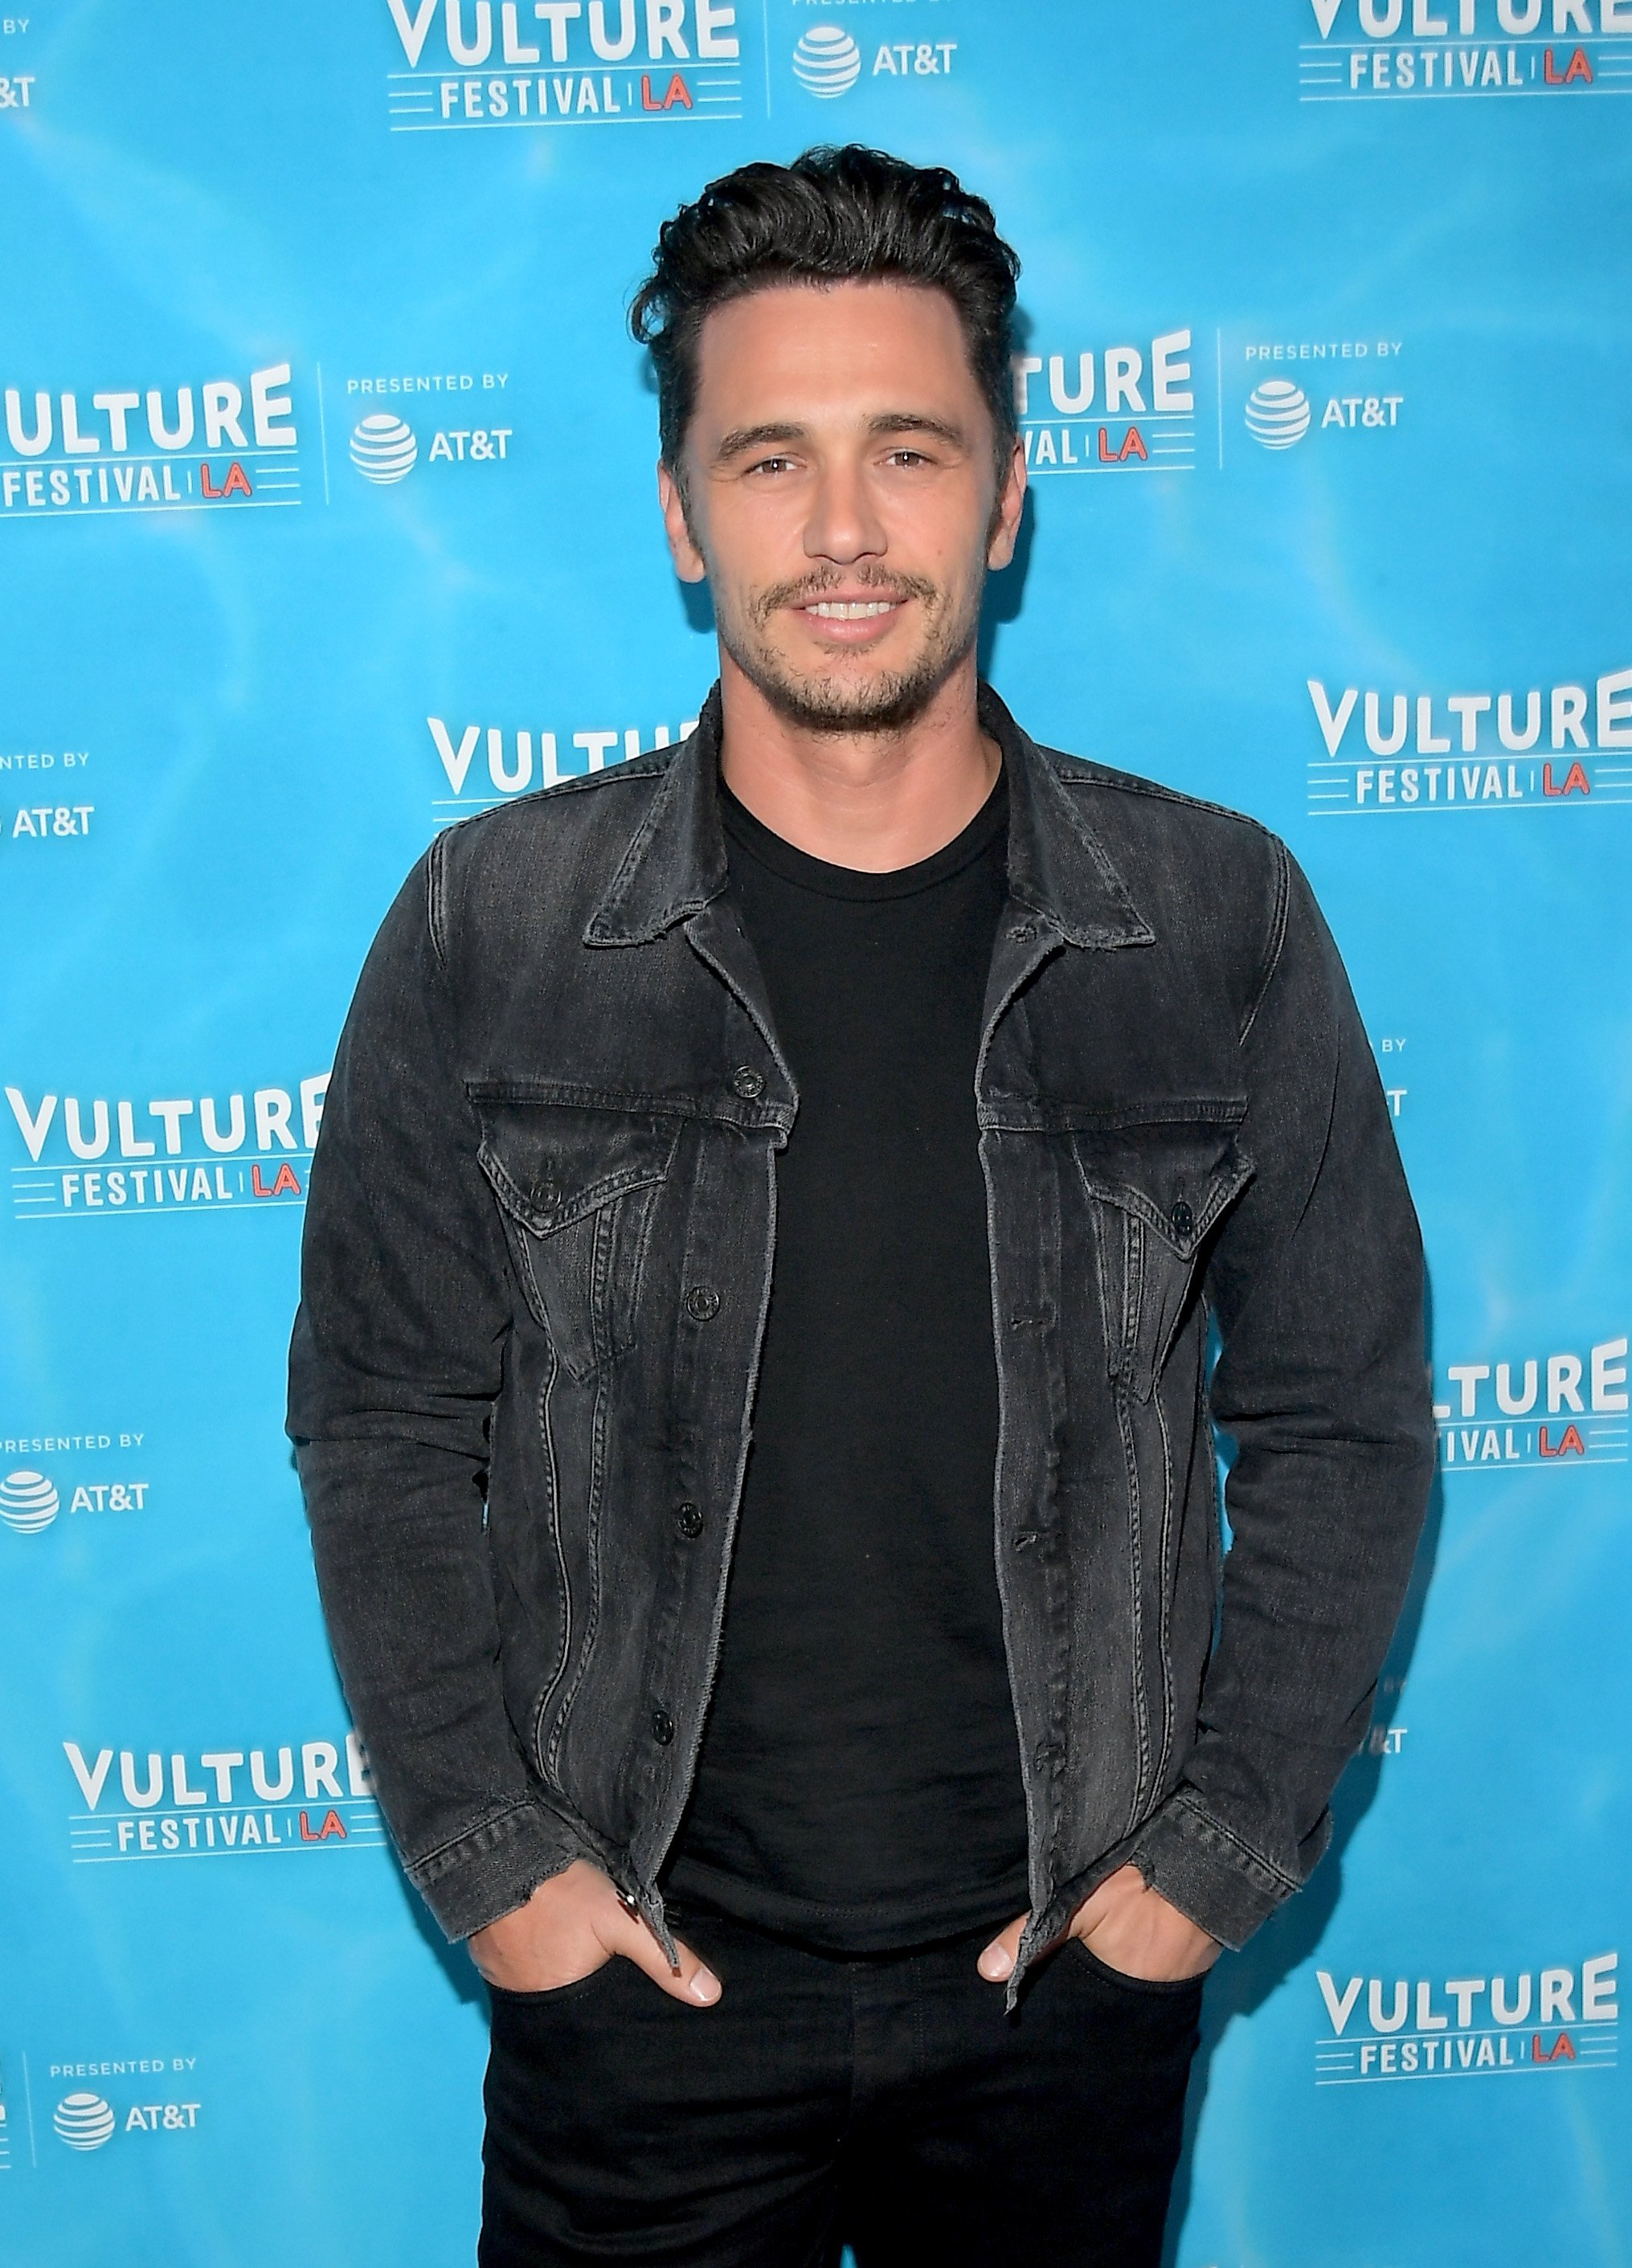 James Franco attends the "Disaster Artist" panel during Vulture Festival LA at Hollywood Roosevelt Hotel on November 18, 2017 in Hollywood, California | Photo: Getty Images